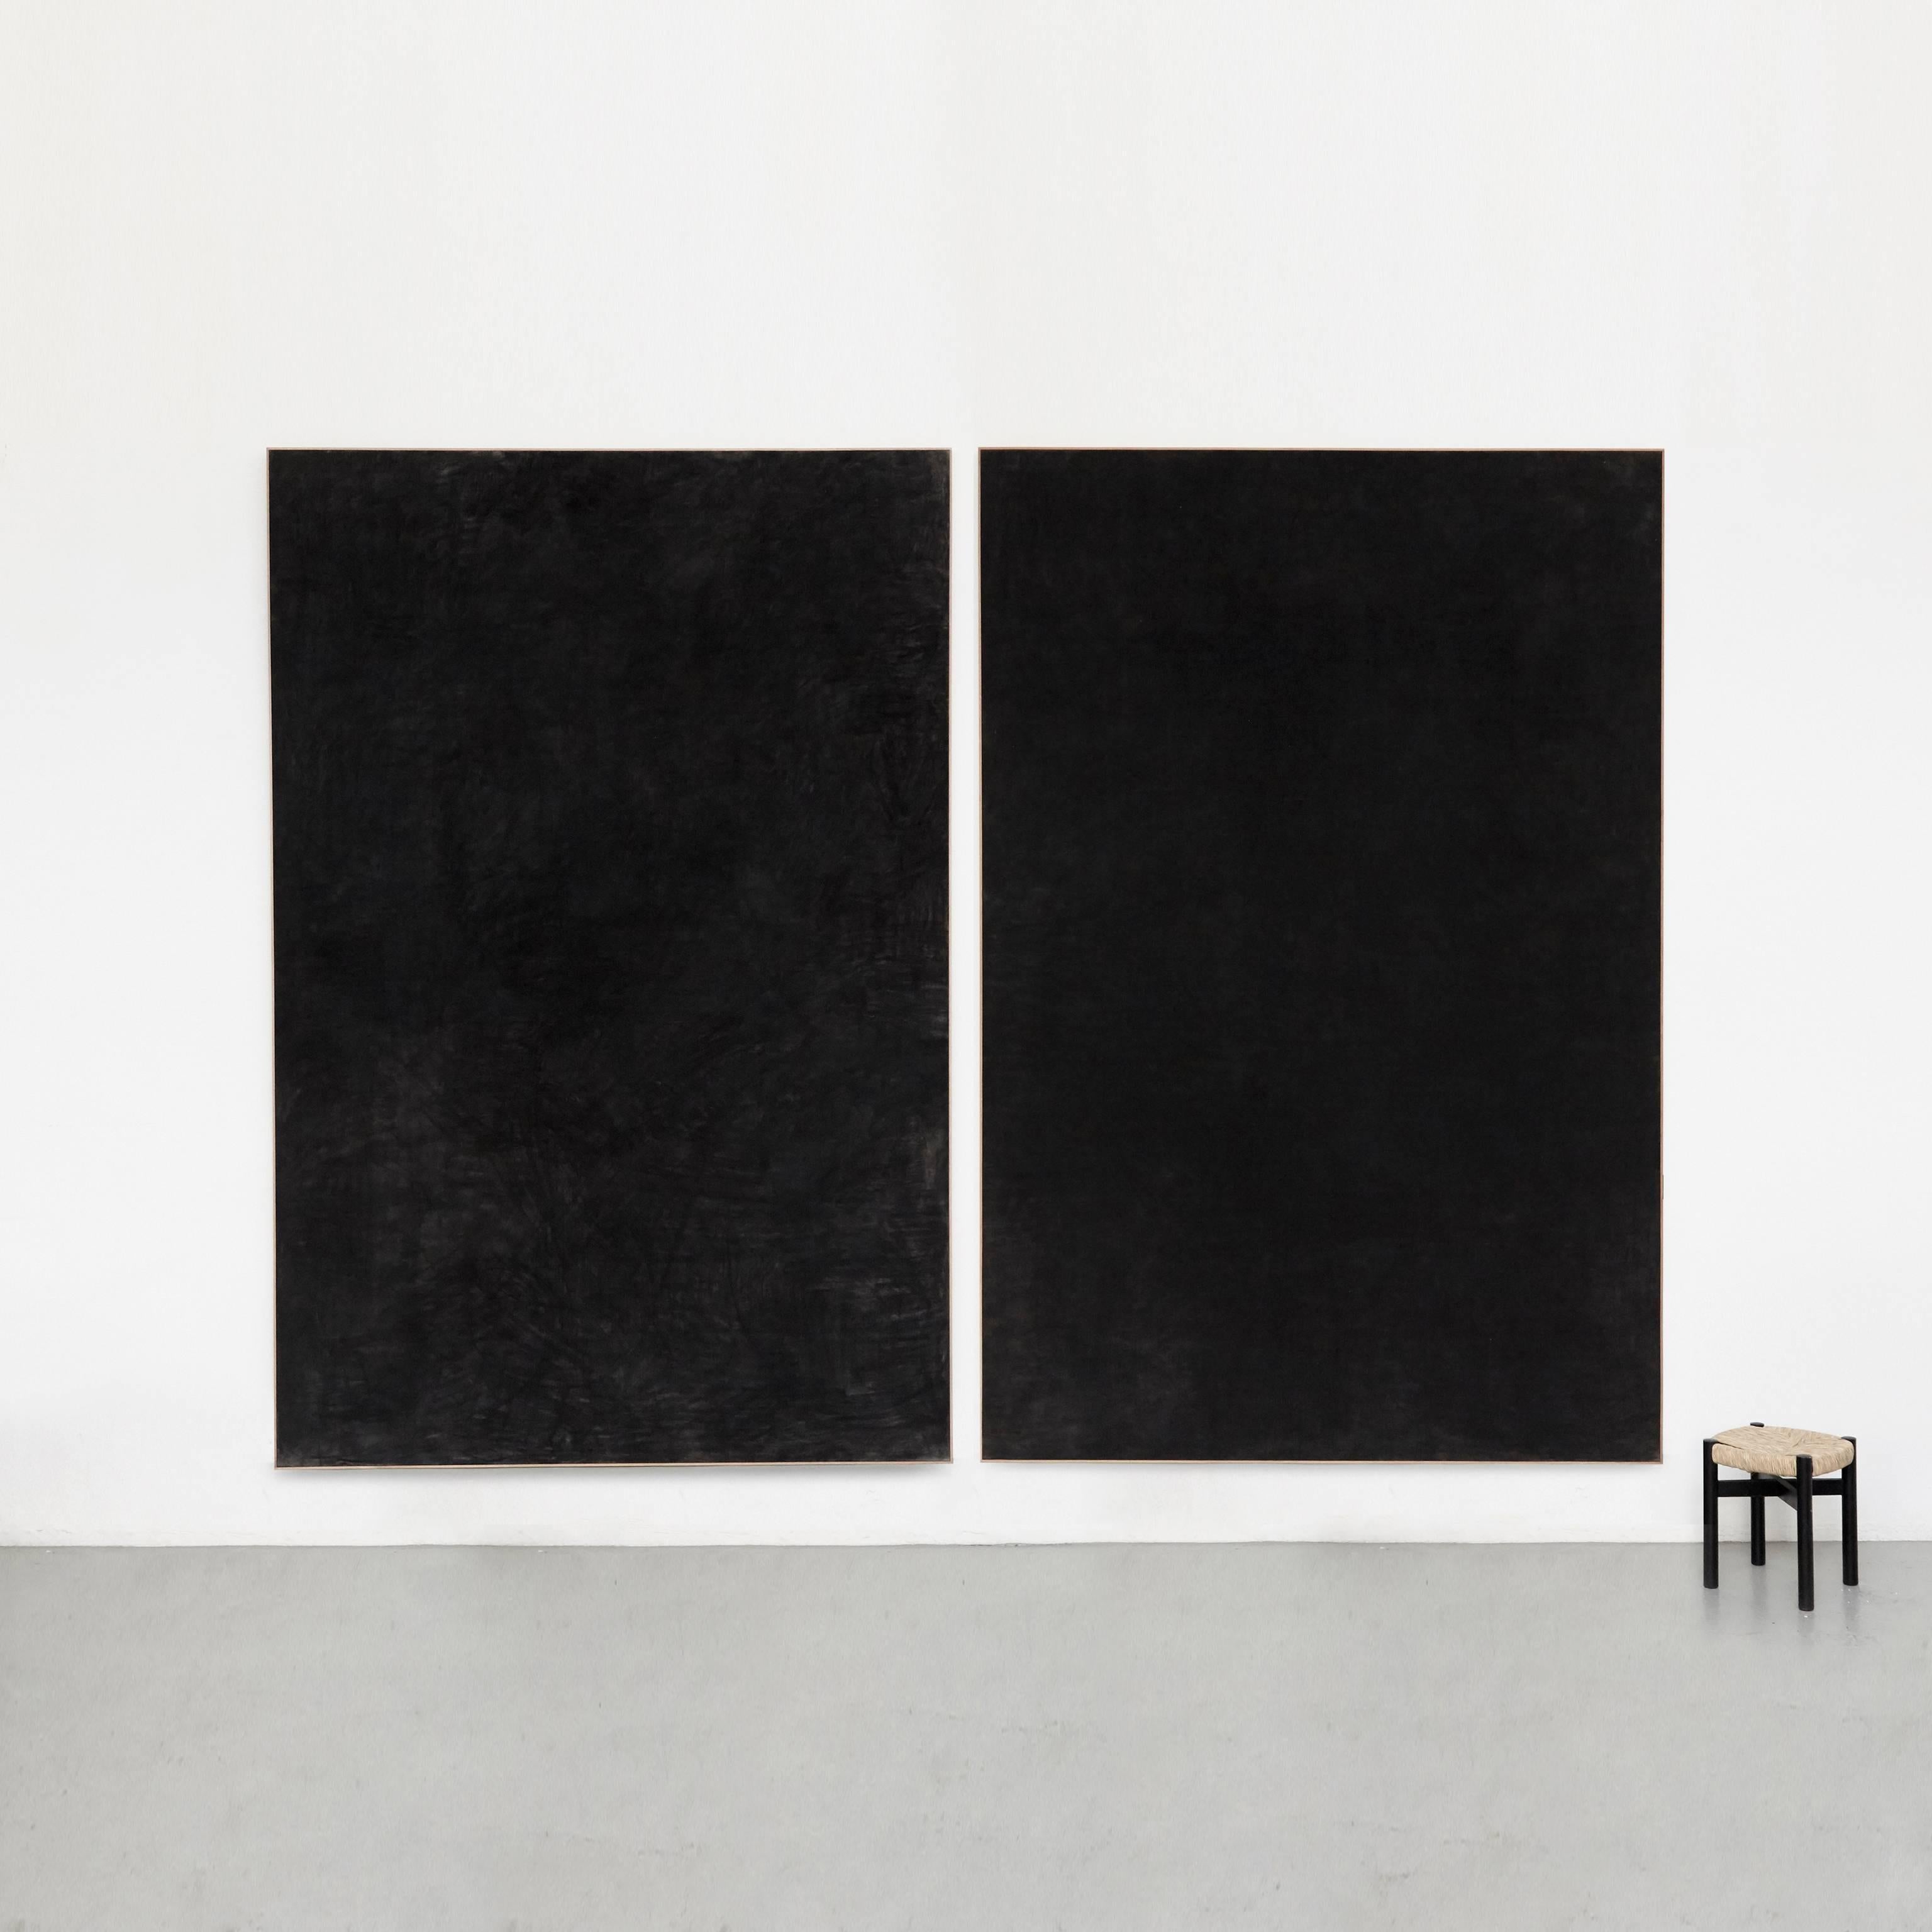 Painting in charcoal on linen made by Enrico Dellatorre.

Measurements: 300 x 200 cm / each canvas / 300 x 400 cm in total

The expressive vision of Enrico is an exploration of space in the painting, an attempt to bring to the limits its